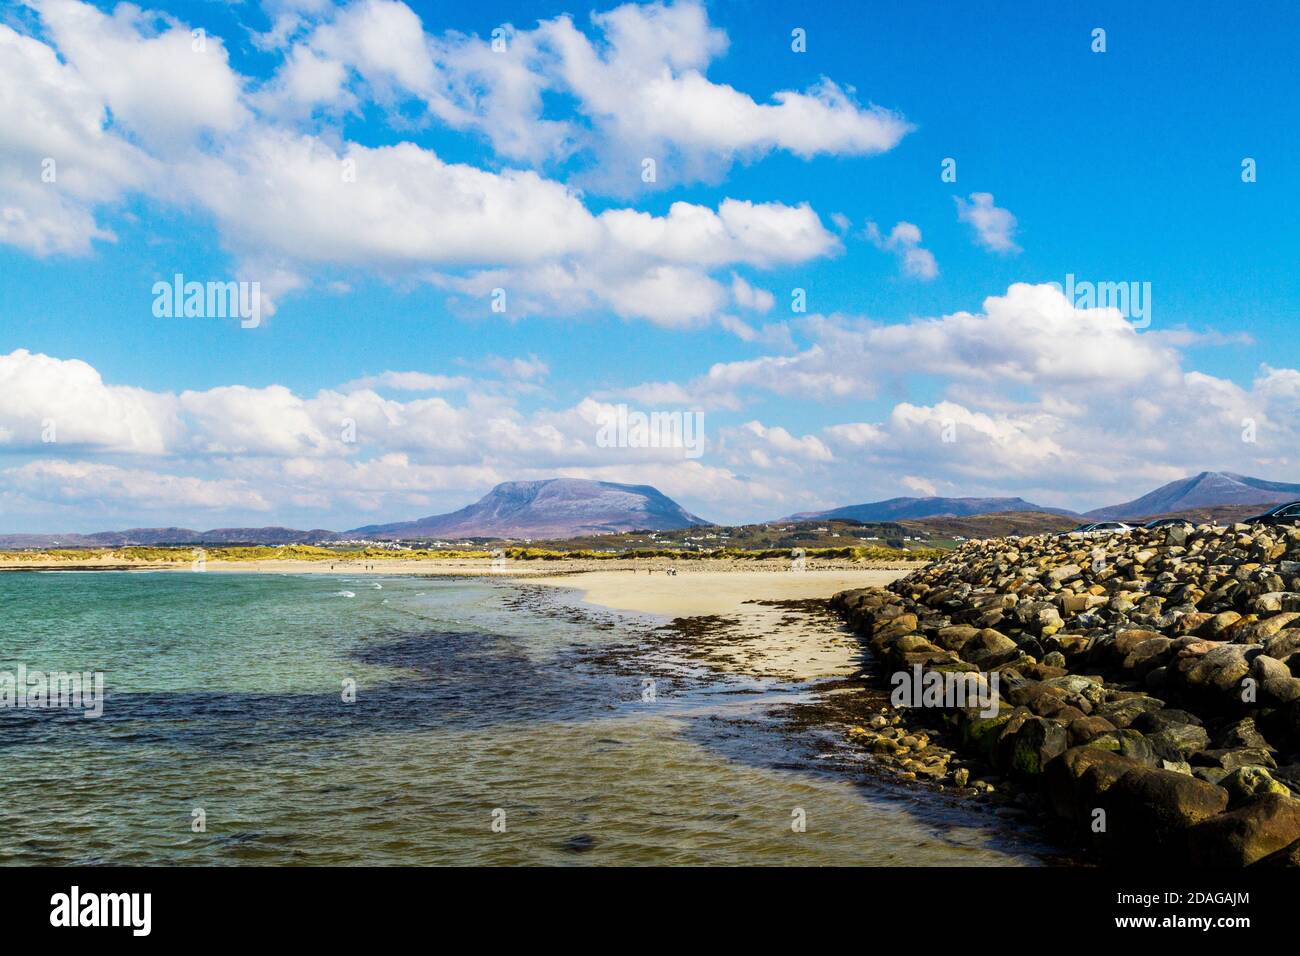 Donegal: Magheraroarty Beach et Muckish Mountain, Co. Donegal, Irlande Banque D'Images